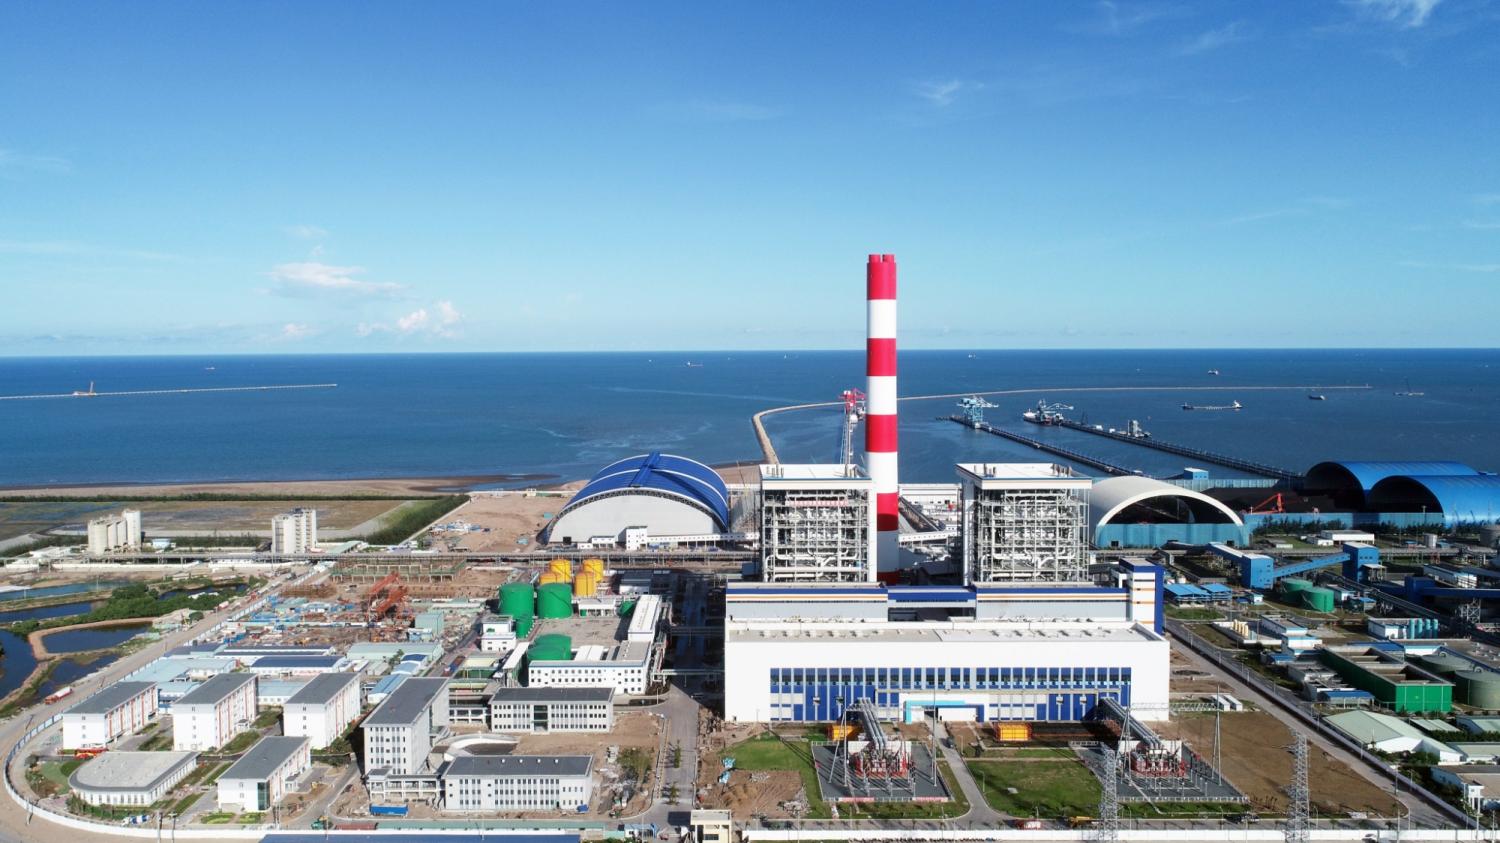 DUYEN HAI 2 THERMAL POWER PLANT PROJECT